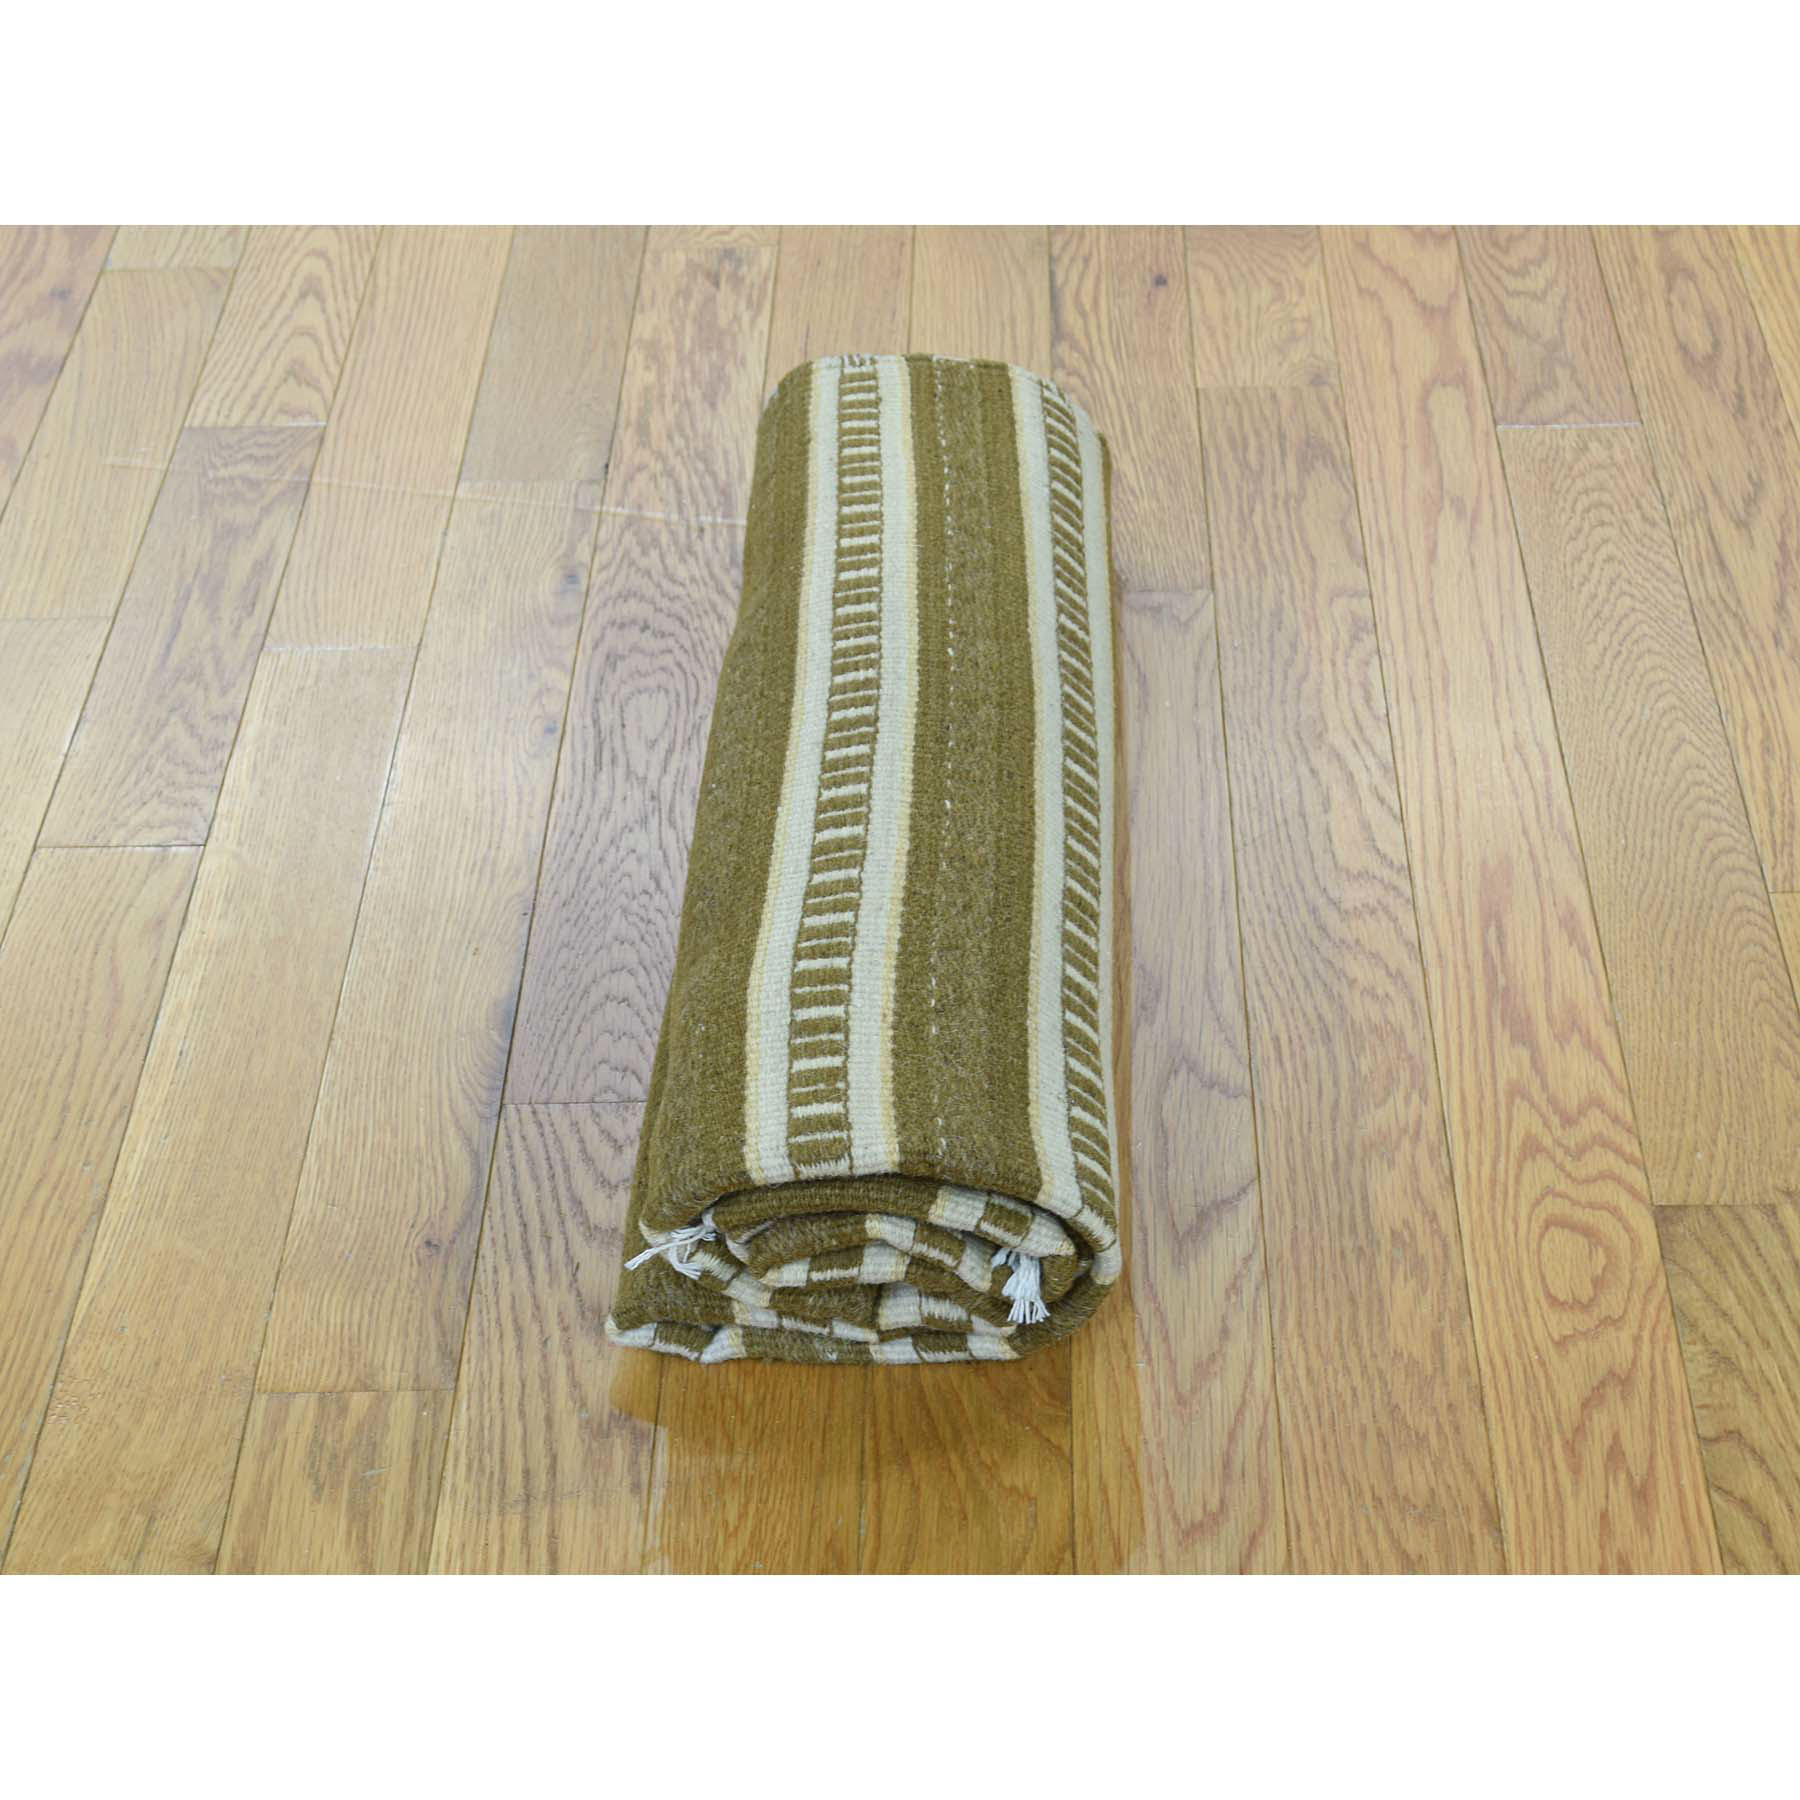 4-x6-2  Hand-Woven Striped Durie Kililm Flat Weave Oriental Rug 